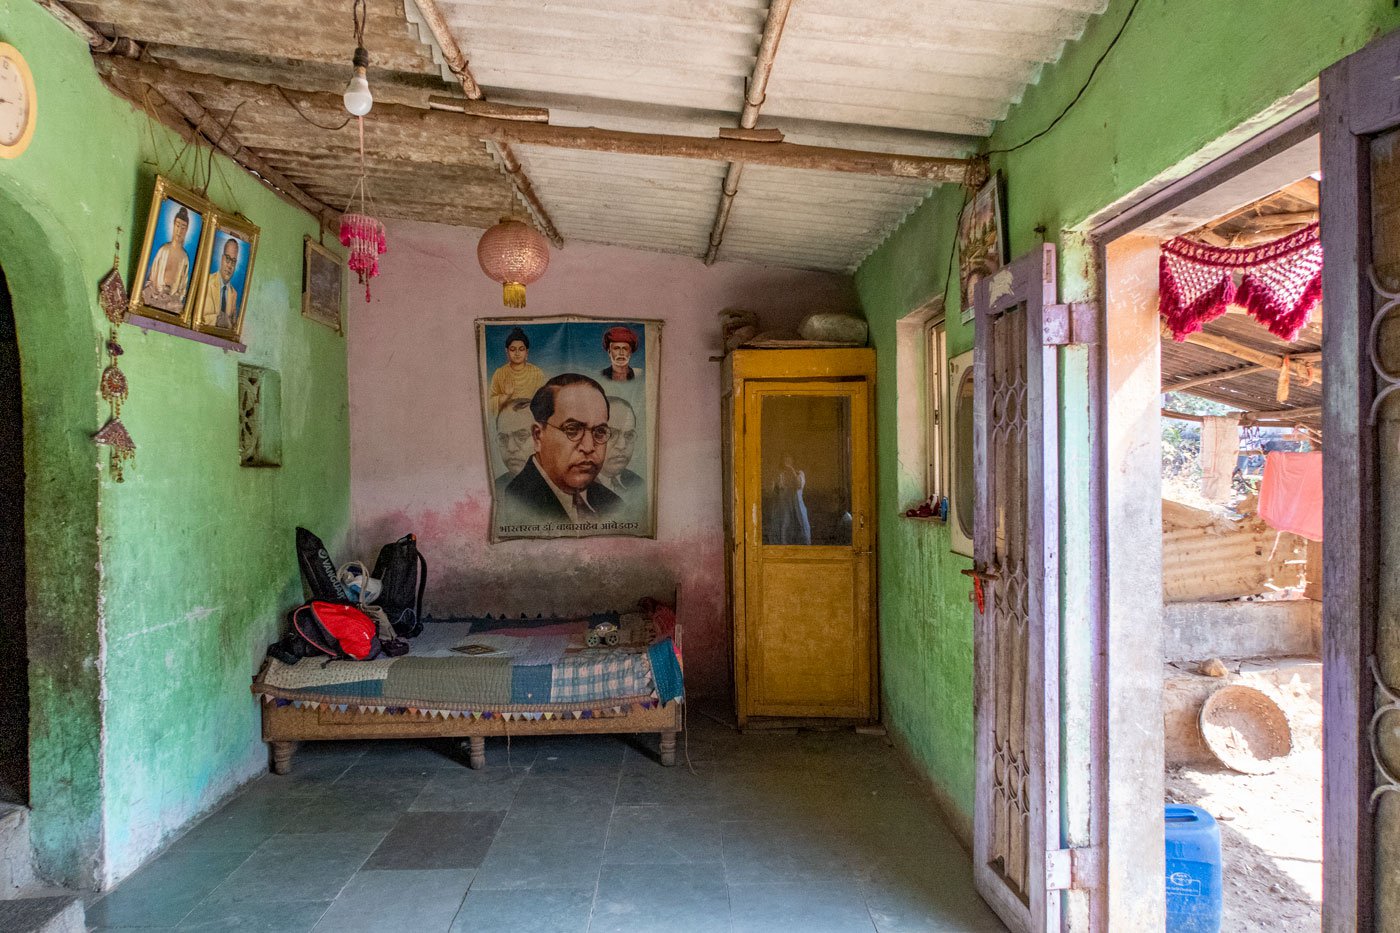 The walls of Kusum Sonawane's home in Nandgaon shows the family's reverence for Babasaheb Ambedkar